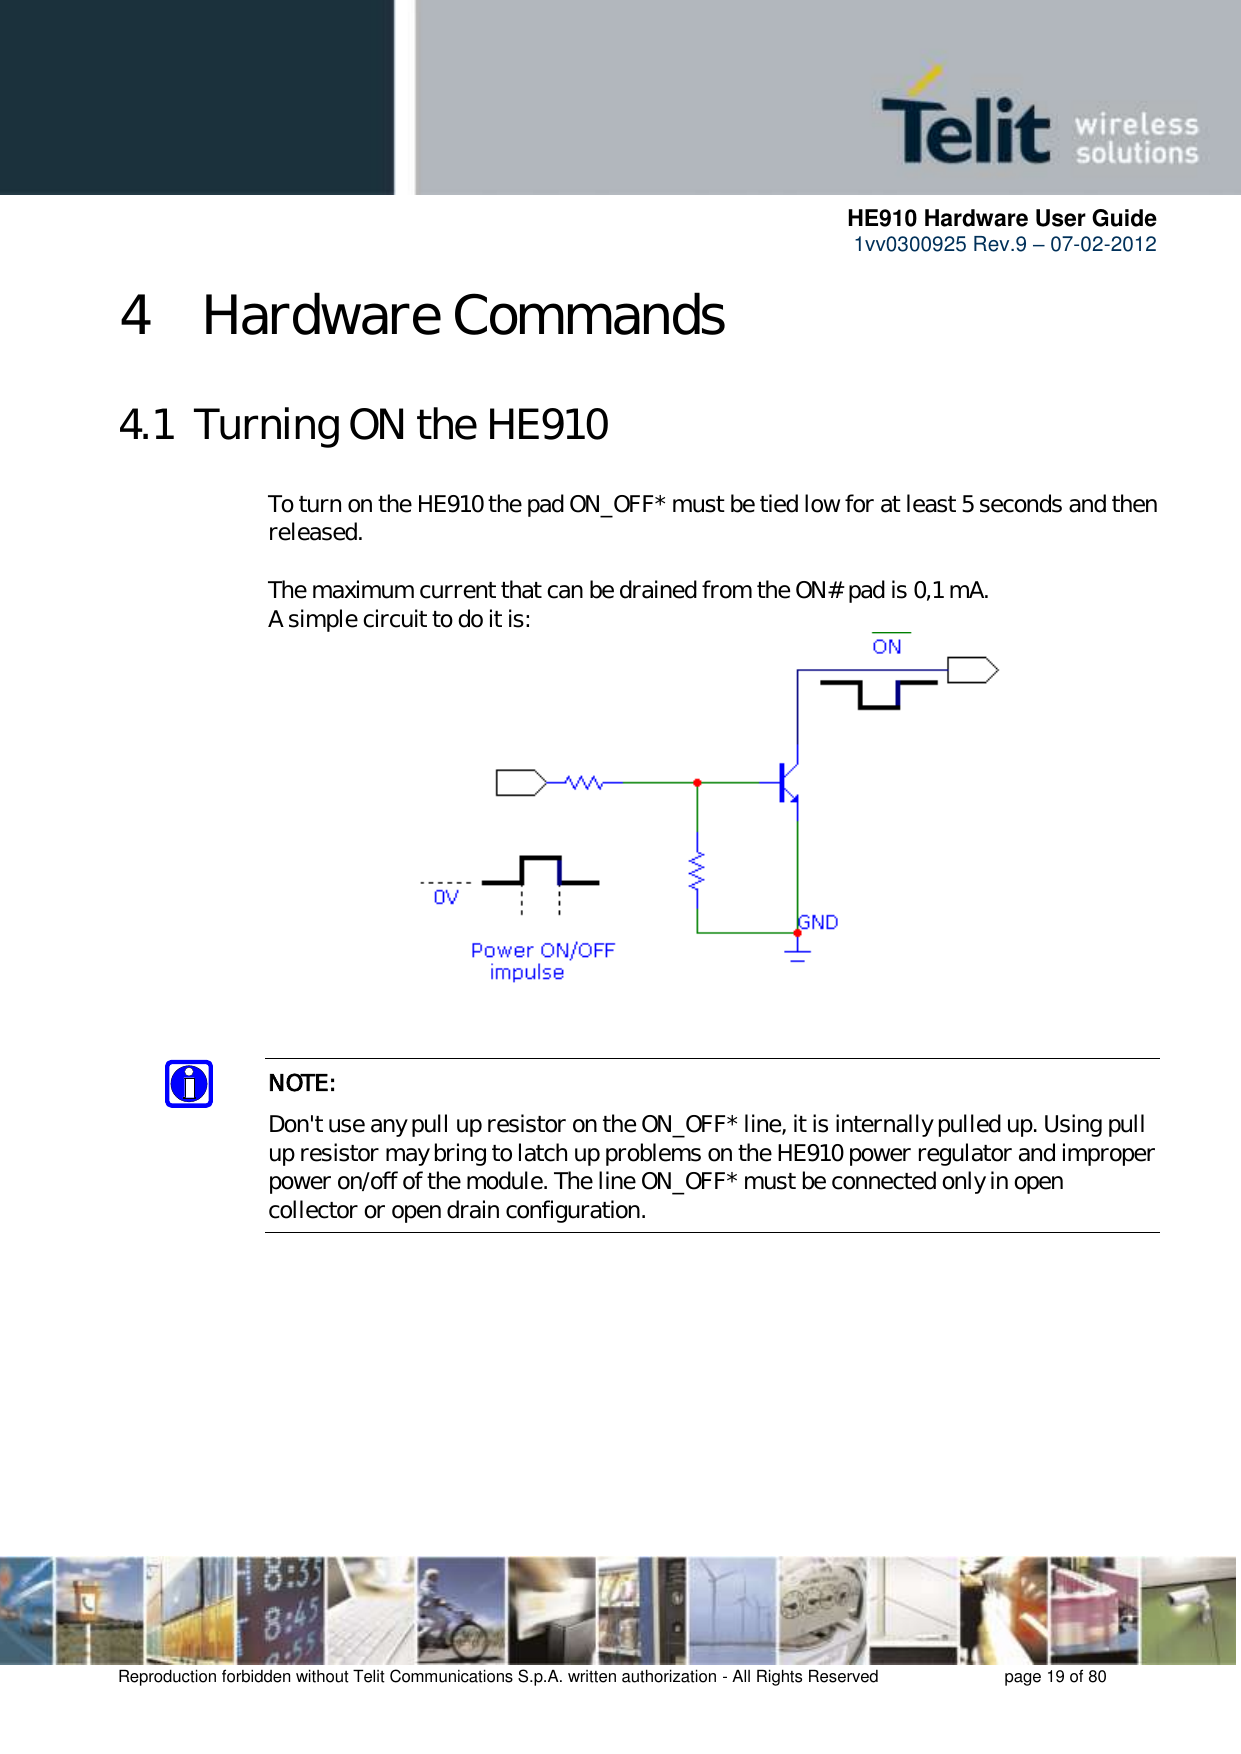      HE910 Hardware User Guide 1vv0300925 Rev.9 – 07-02-2012    Reproduction forbidden without Telit Communications S.p.A. written authorization - All Rights Reserved    page 19 of 80  4 Hardware Commands 4.1  Turning ON the HE910 To turn on the HE910 the pad ON_OFF* must be tied low for at least 5 seconds and then released.  The maximum current that can be drained from the ON# pad is 0,1 mA. A simple circuit to do it is:   NOTE: Don&apos;t use any pull up resistor on the ON_OFF* line, it is internally pulled up. Using pull up resistor may bring to latch up problems on the HE910 power regulator and improper power on/off of the module. The line ON_OFF* must be connected only in open collector or open drain configuration.  